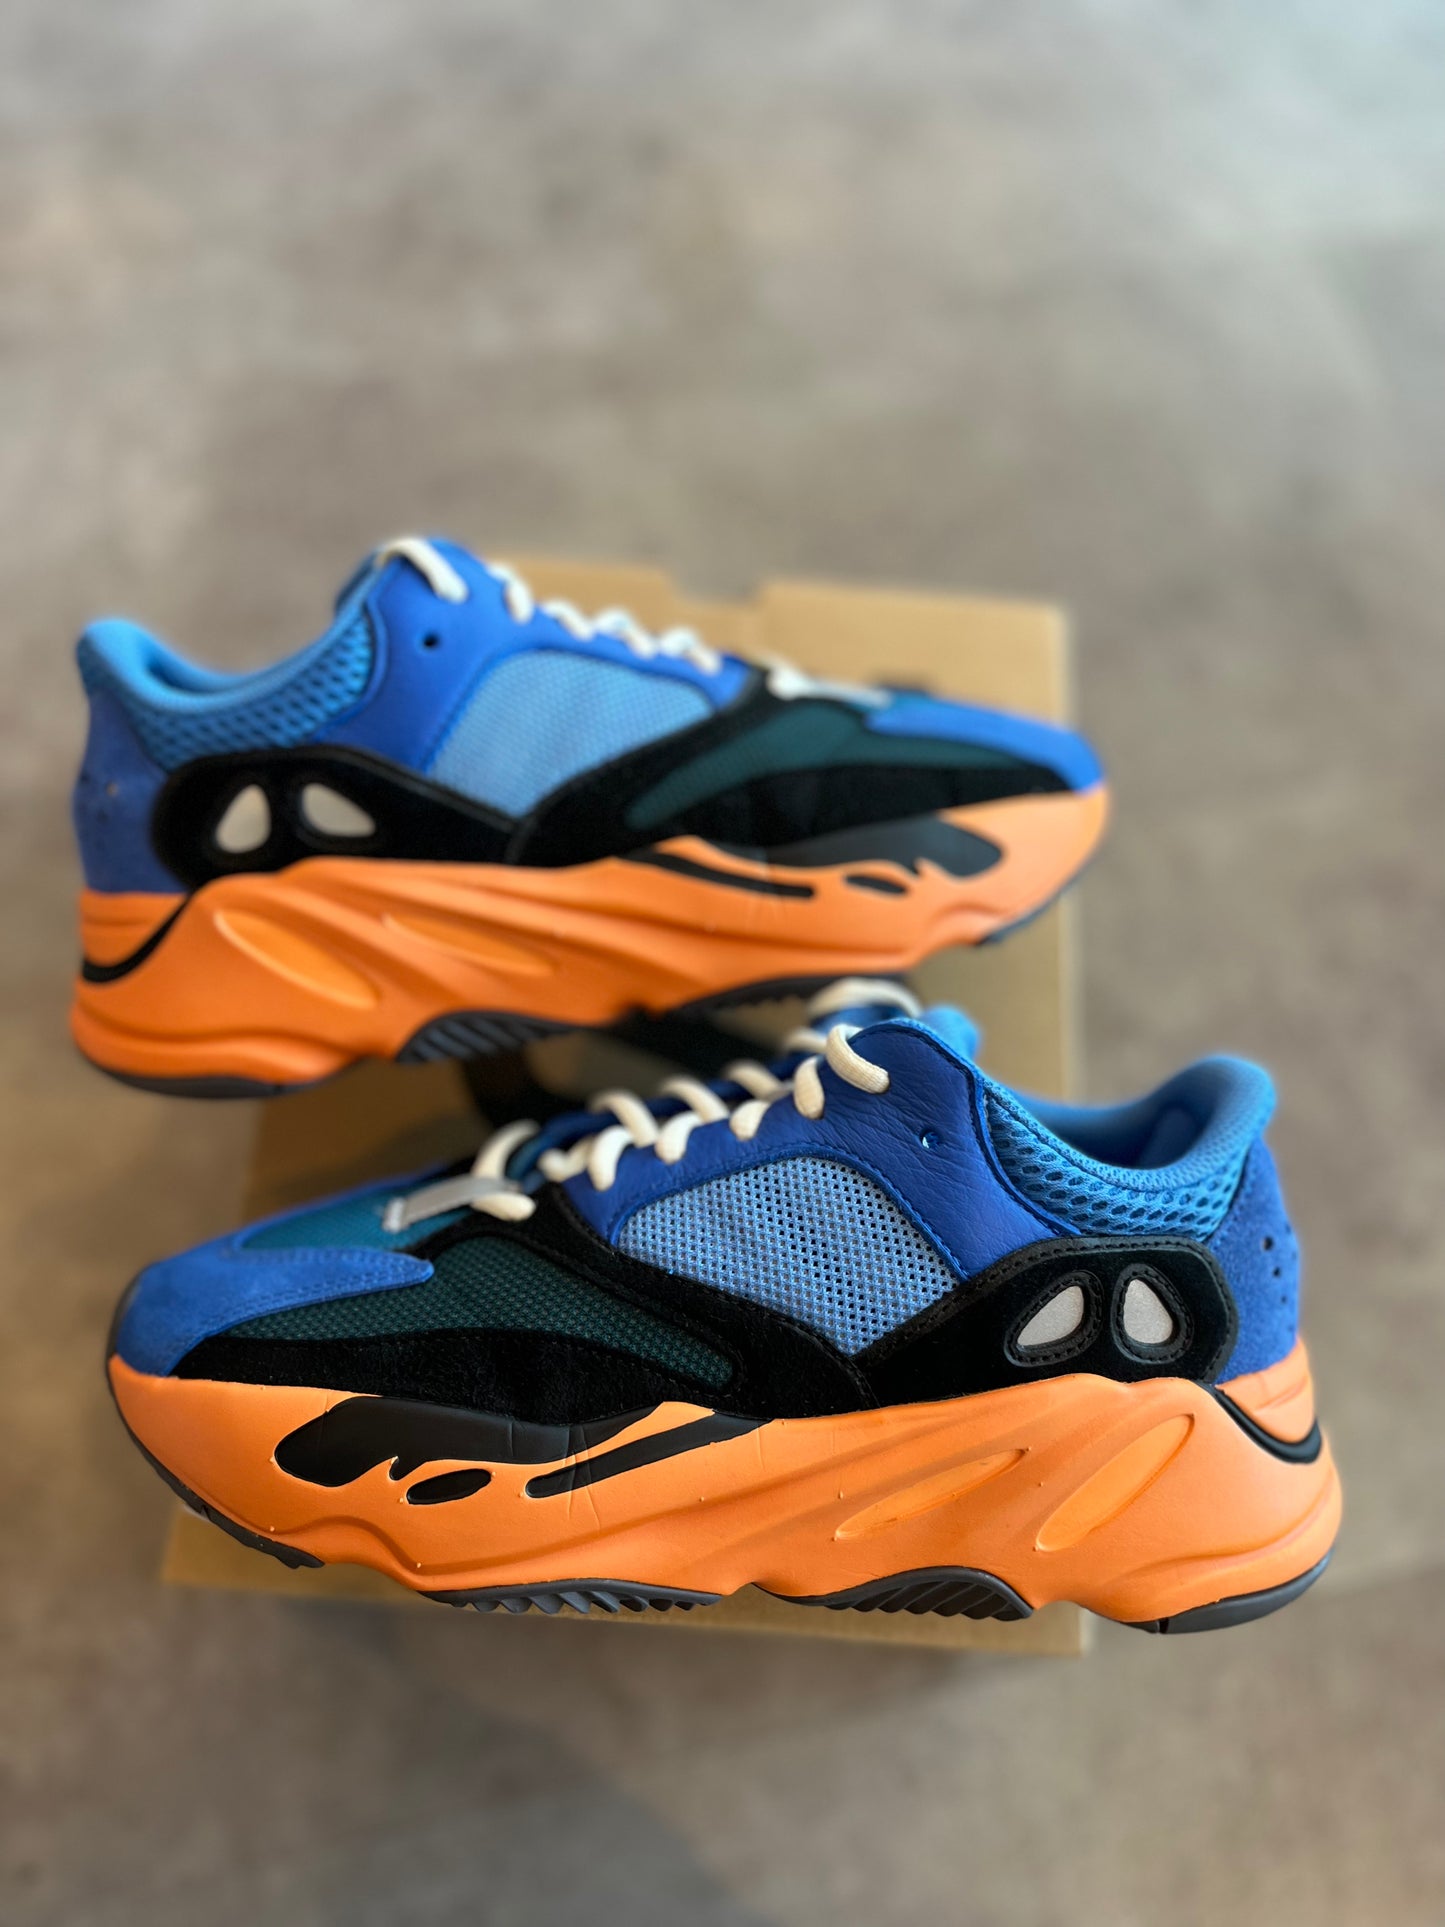 Adidas Yeezy 700 Bright Blue (Preowned)